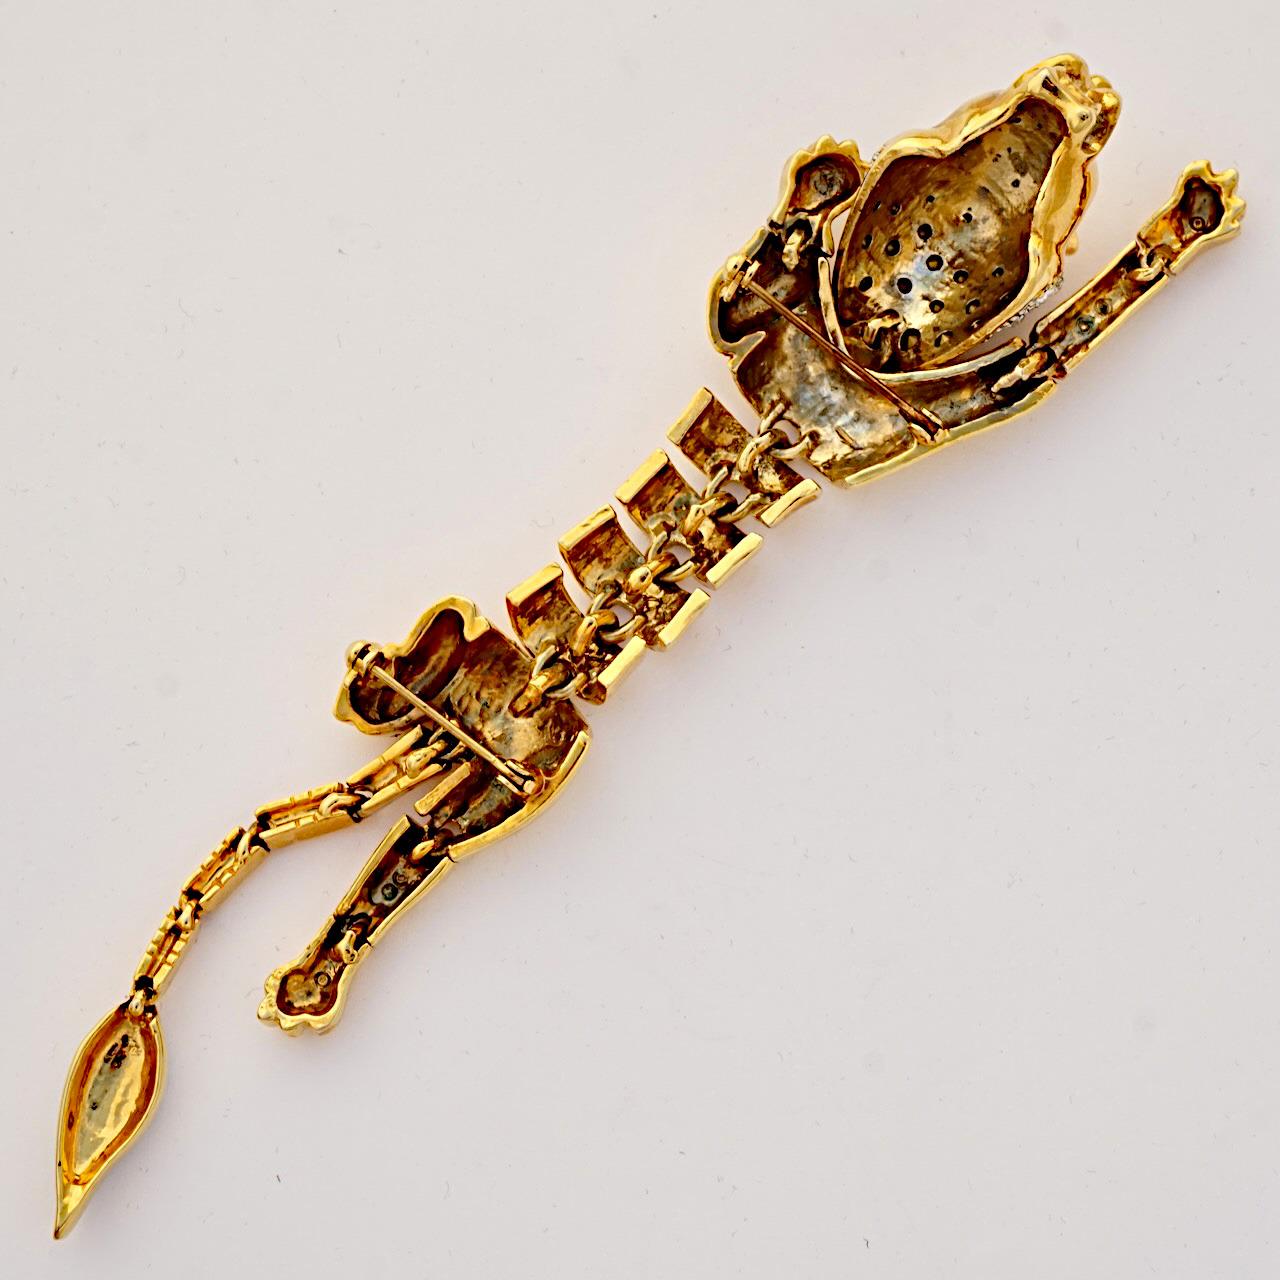 Gold Plated and Rhinestone Articulated Lion Shoulder Brooch circa 1980s For Sale 2